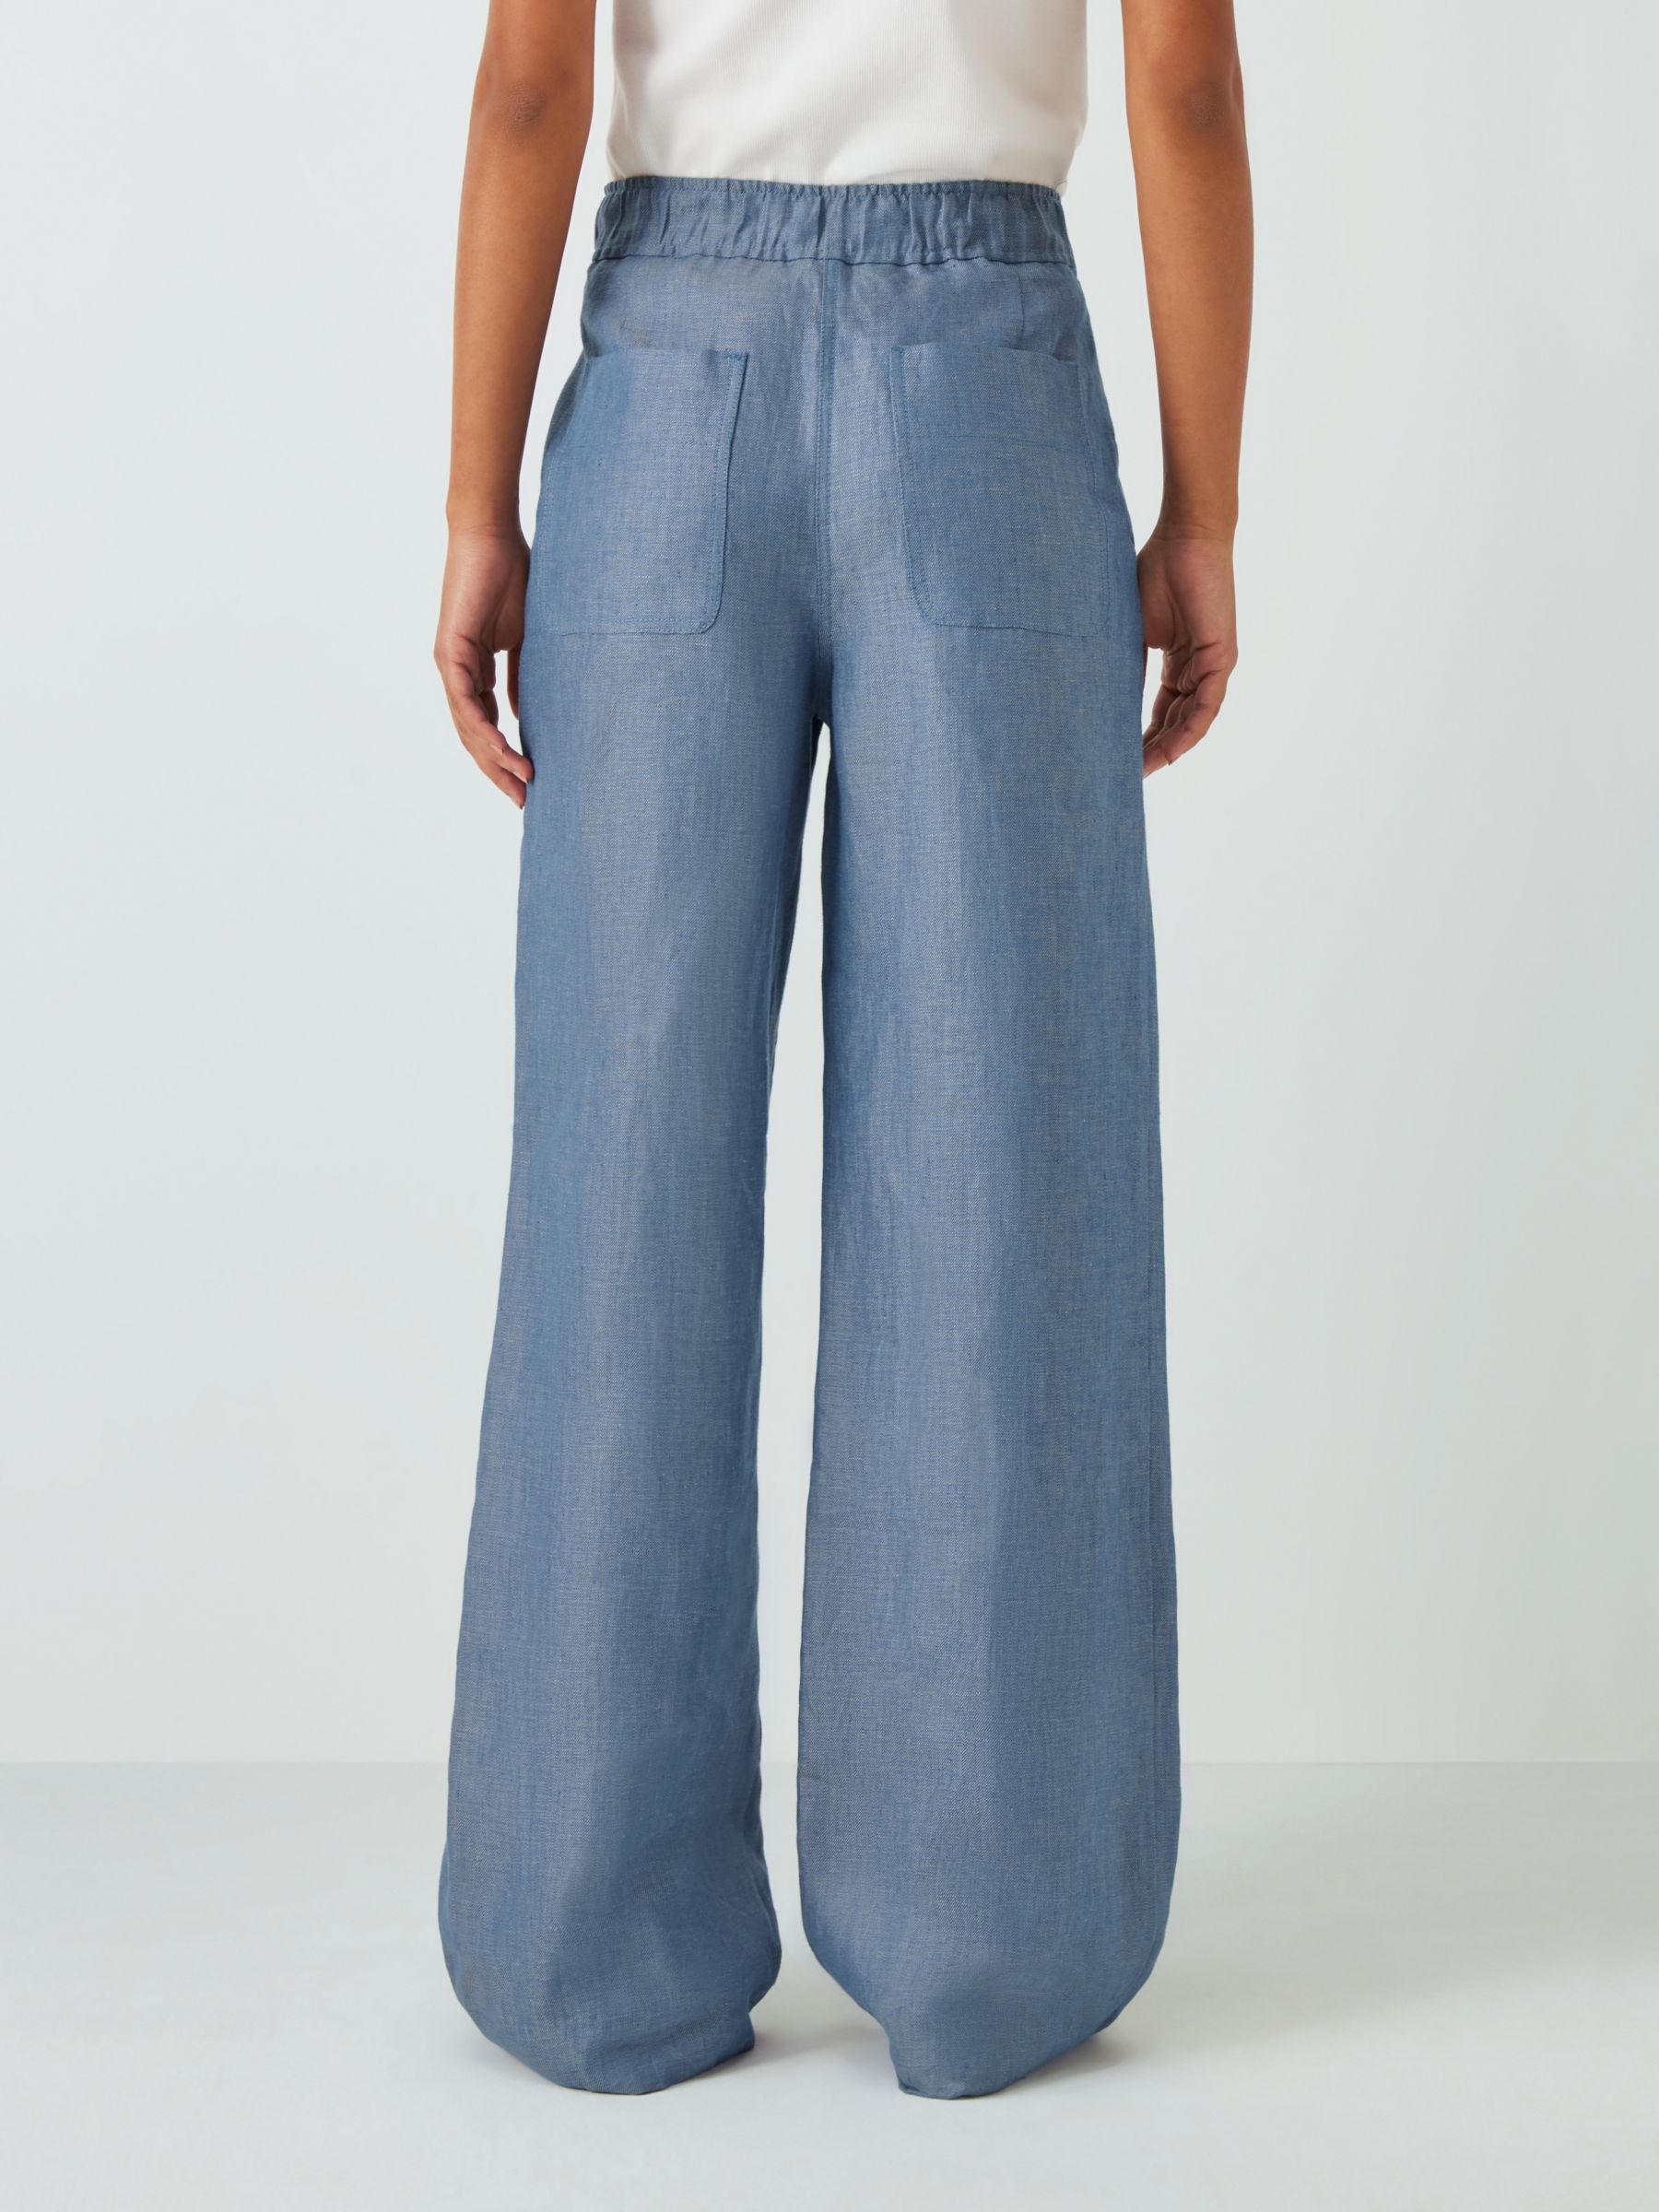 John Lewis Straight Fit Linen Trousers, Blue Twill at John Lewis & Partners